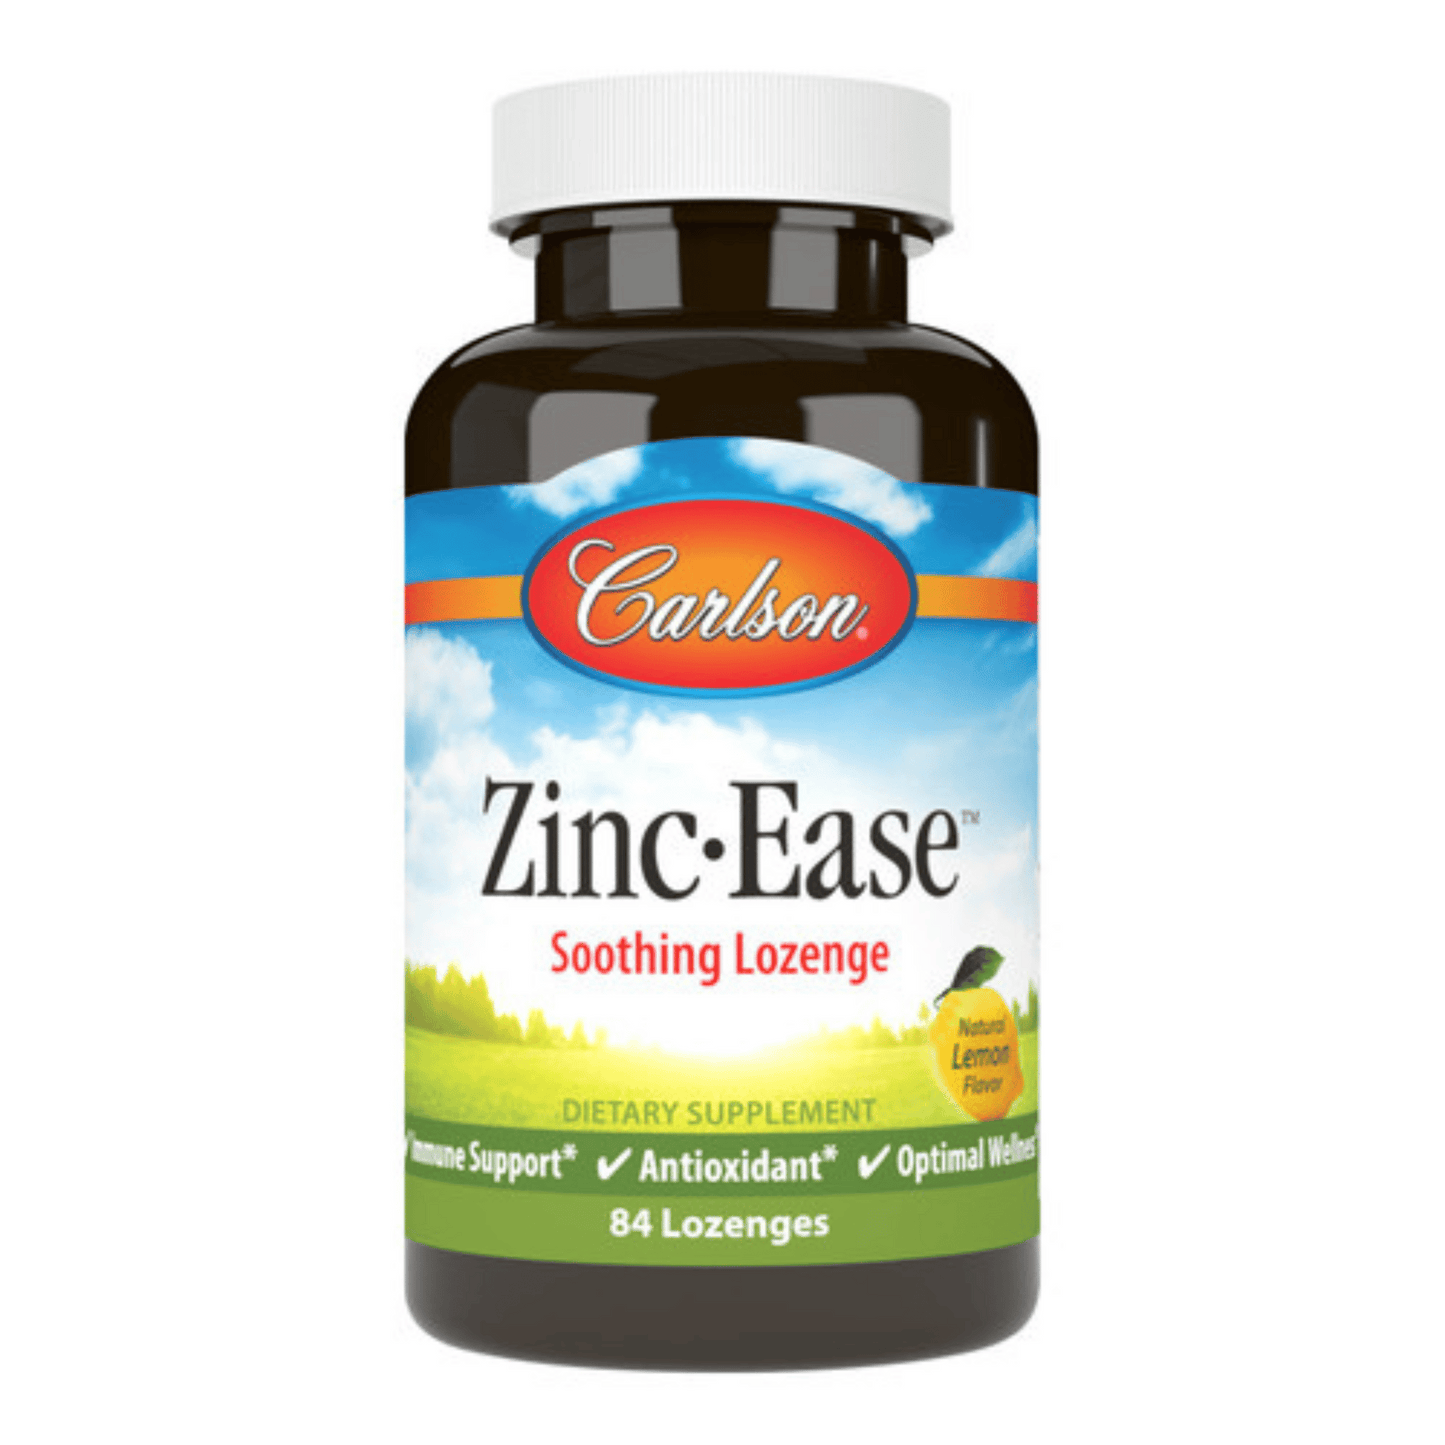 Primary Image of Zinc Ease (84 count)